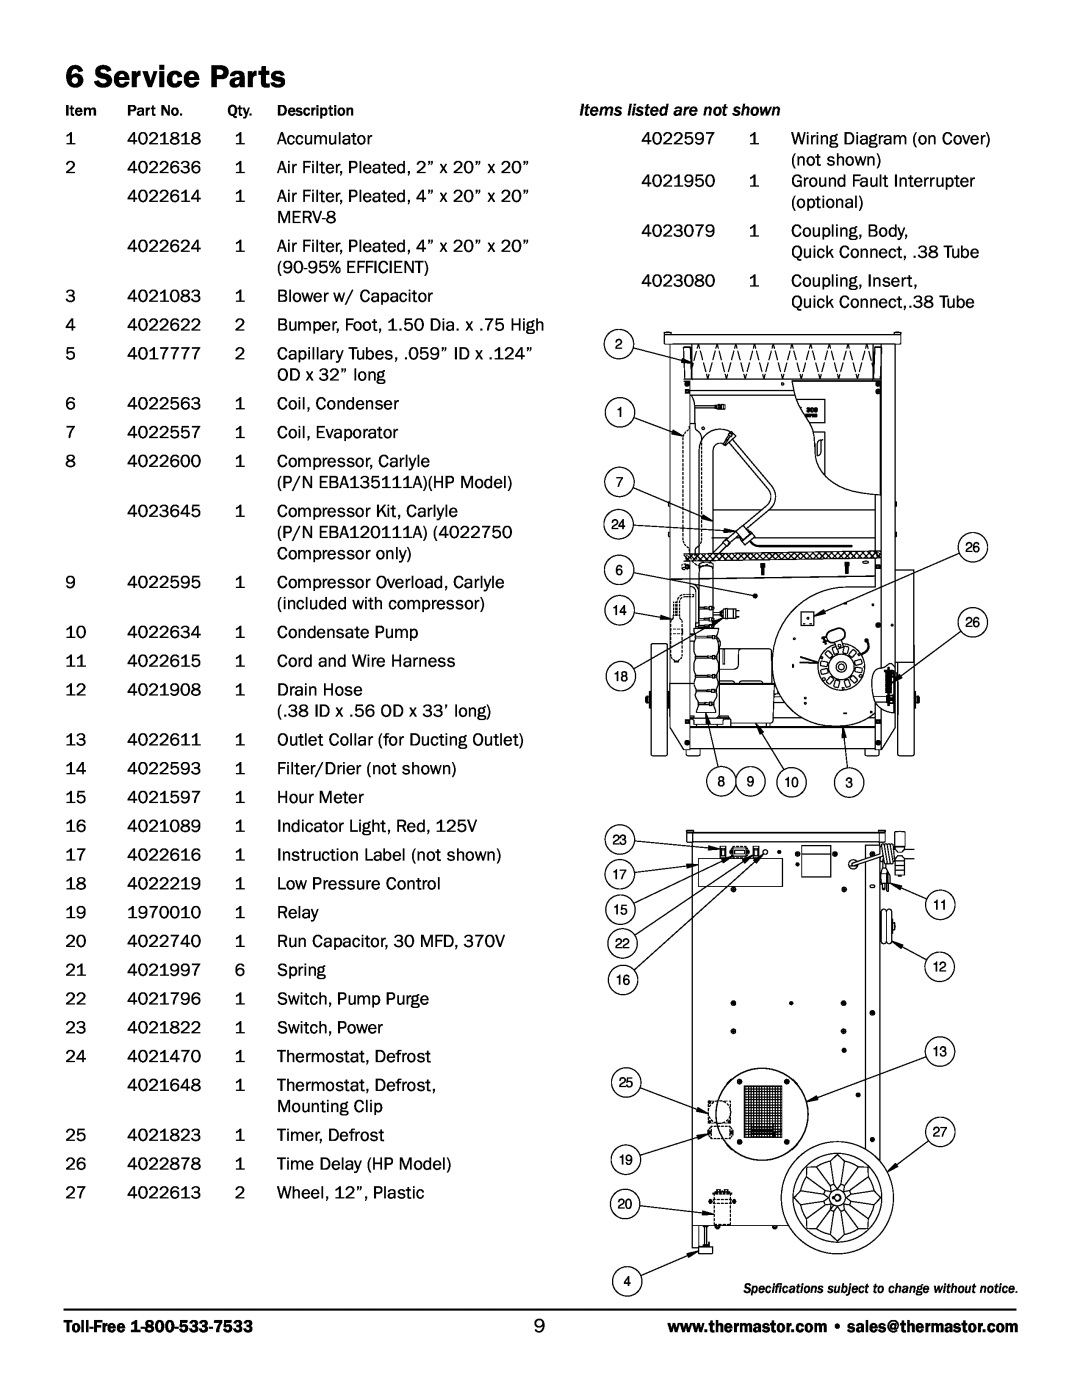 Therma-Stor Products Group 300 owner manual Service Parts, Items listed are not shown 